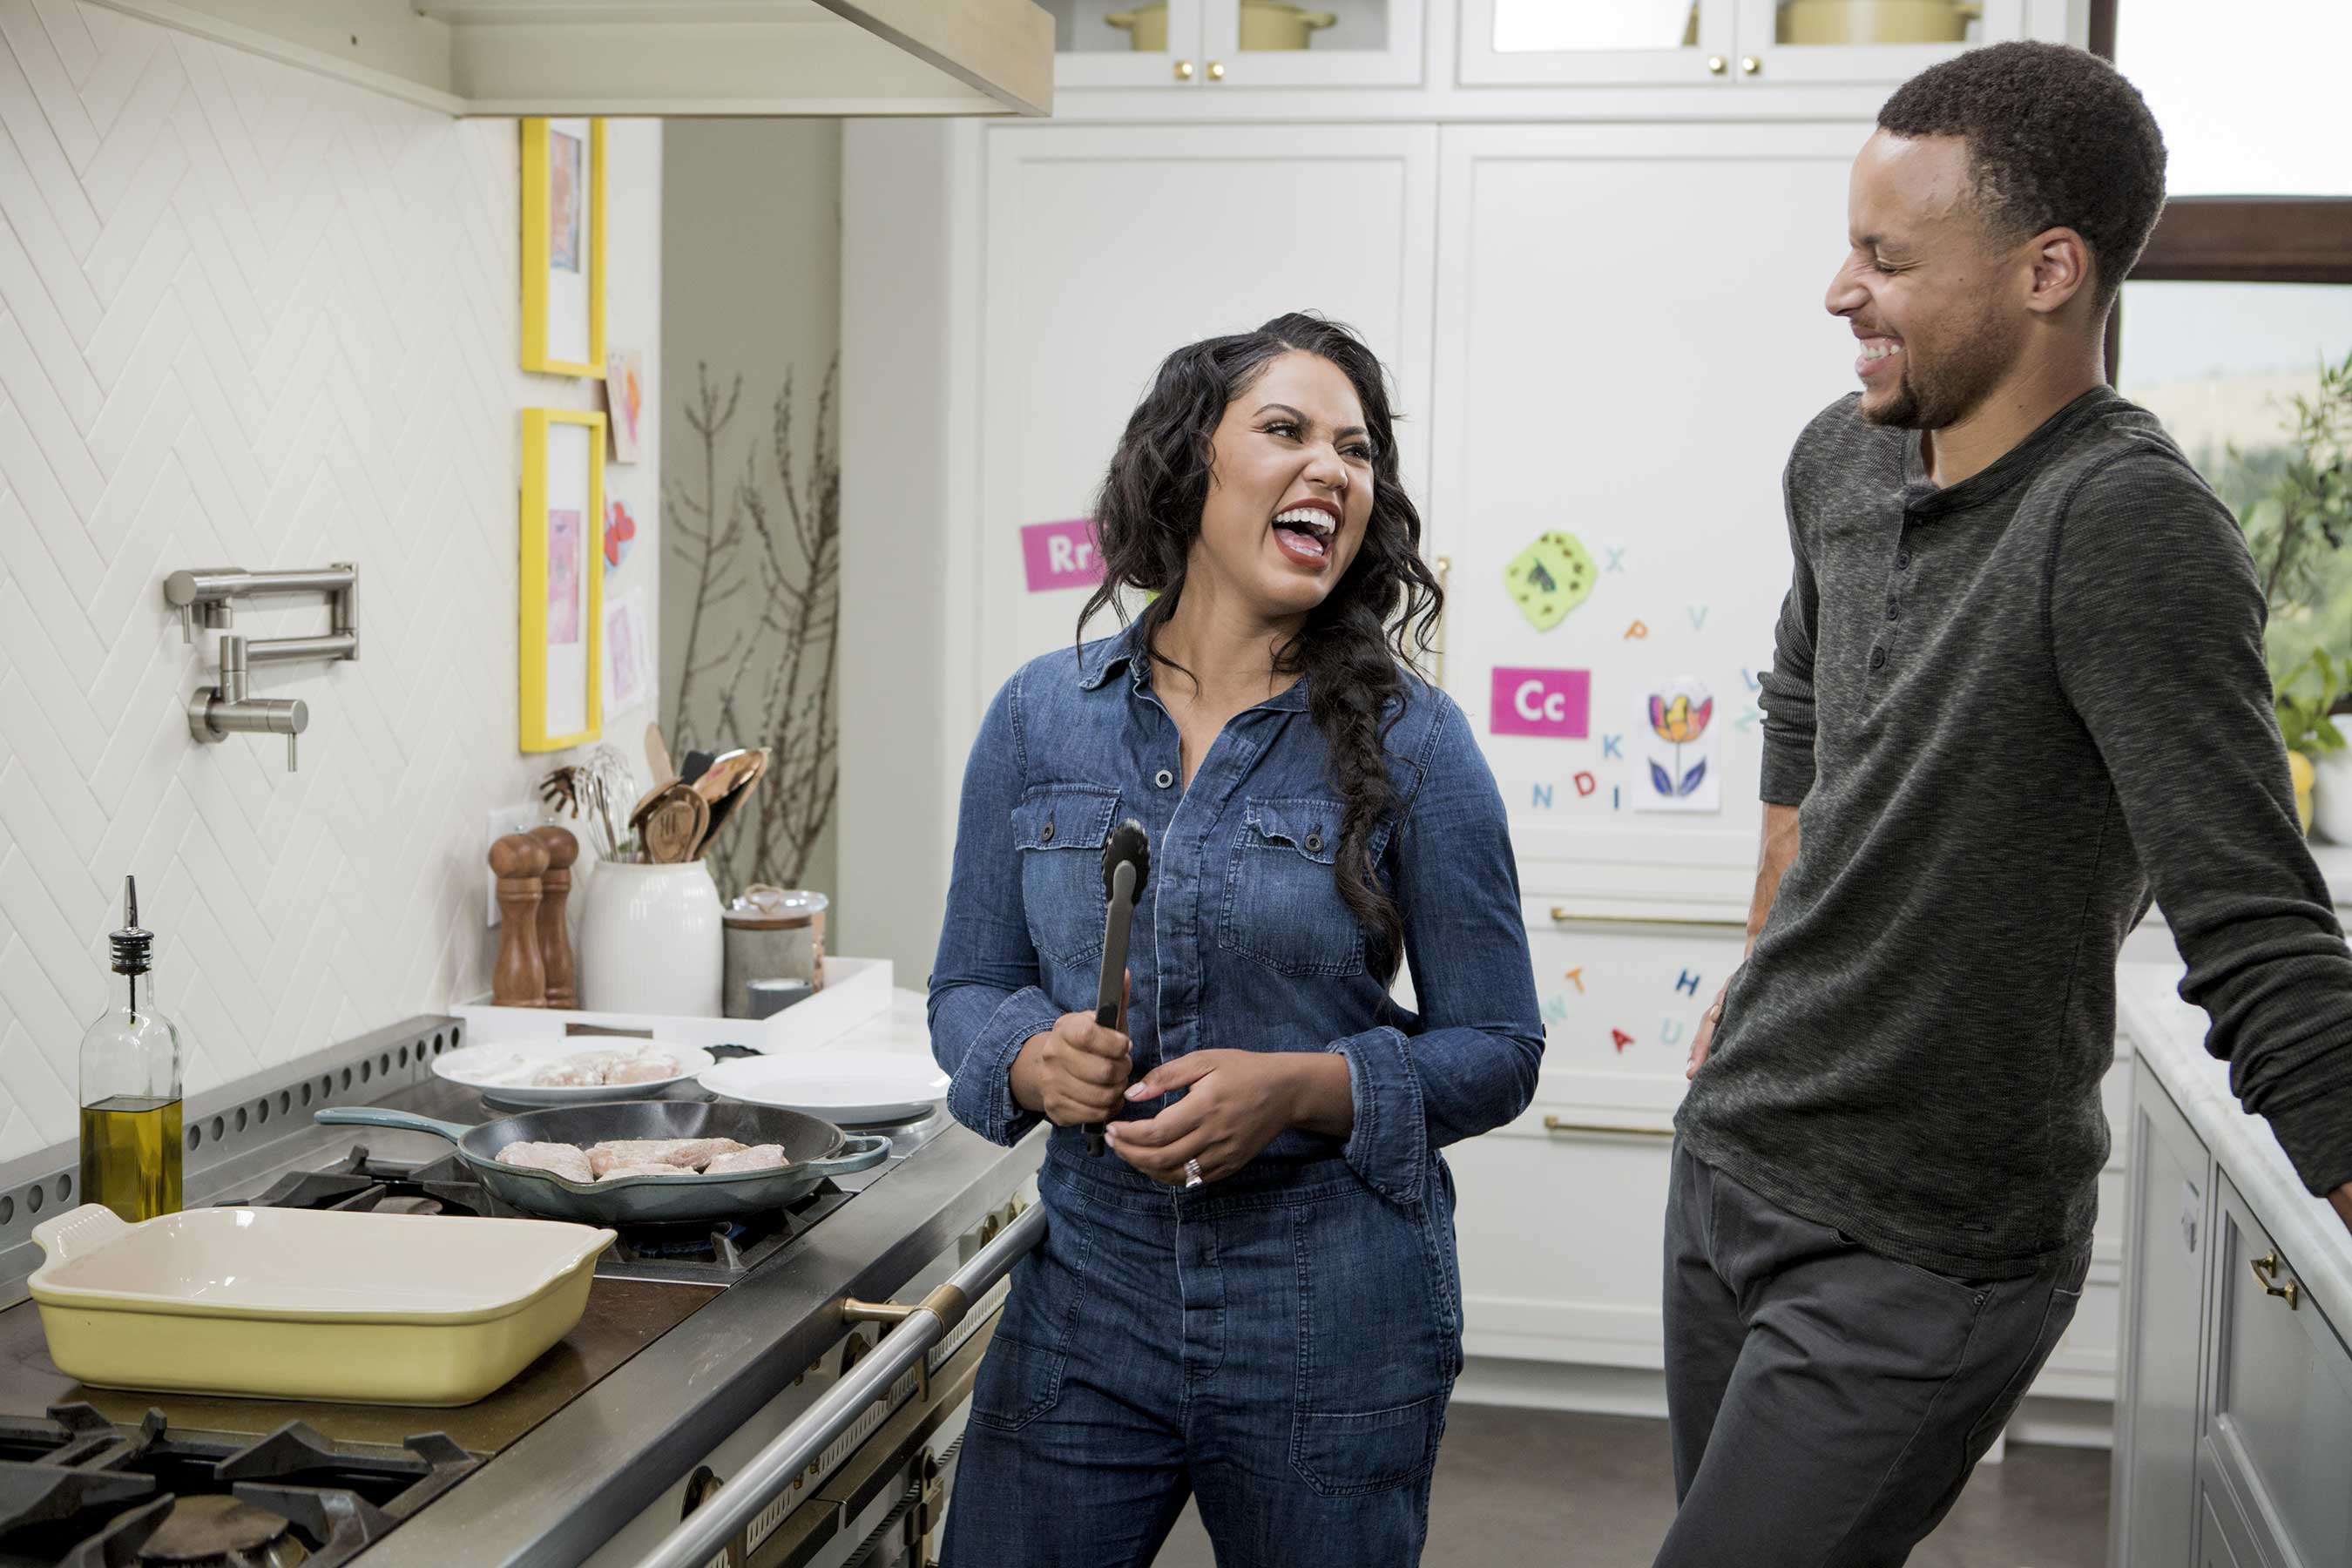 Ayesha Curry and husband Stephen Curry in the kitchen on Food Network's Ayesha's Homemade